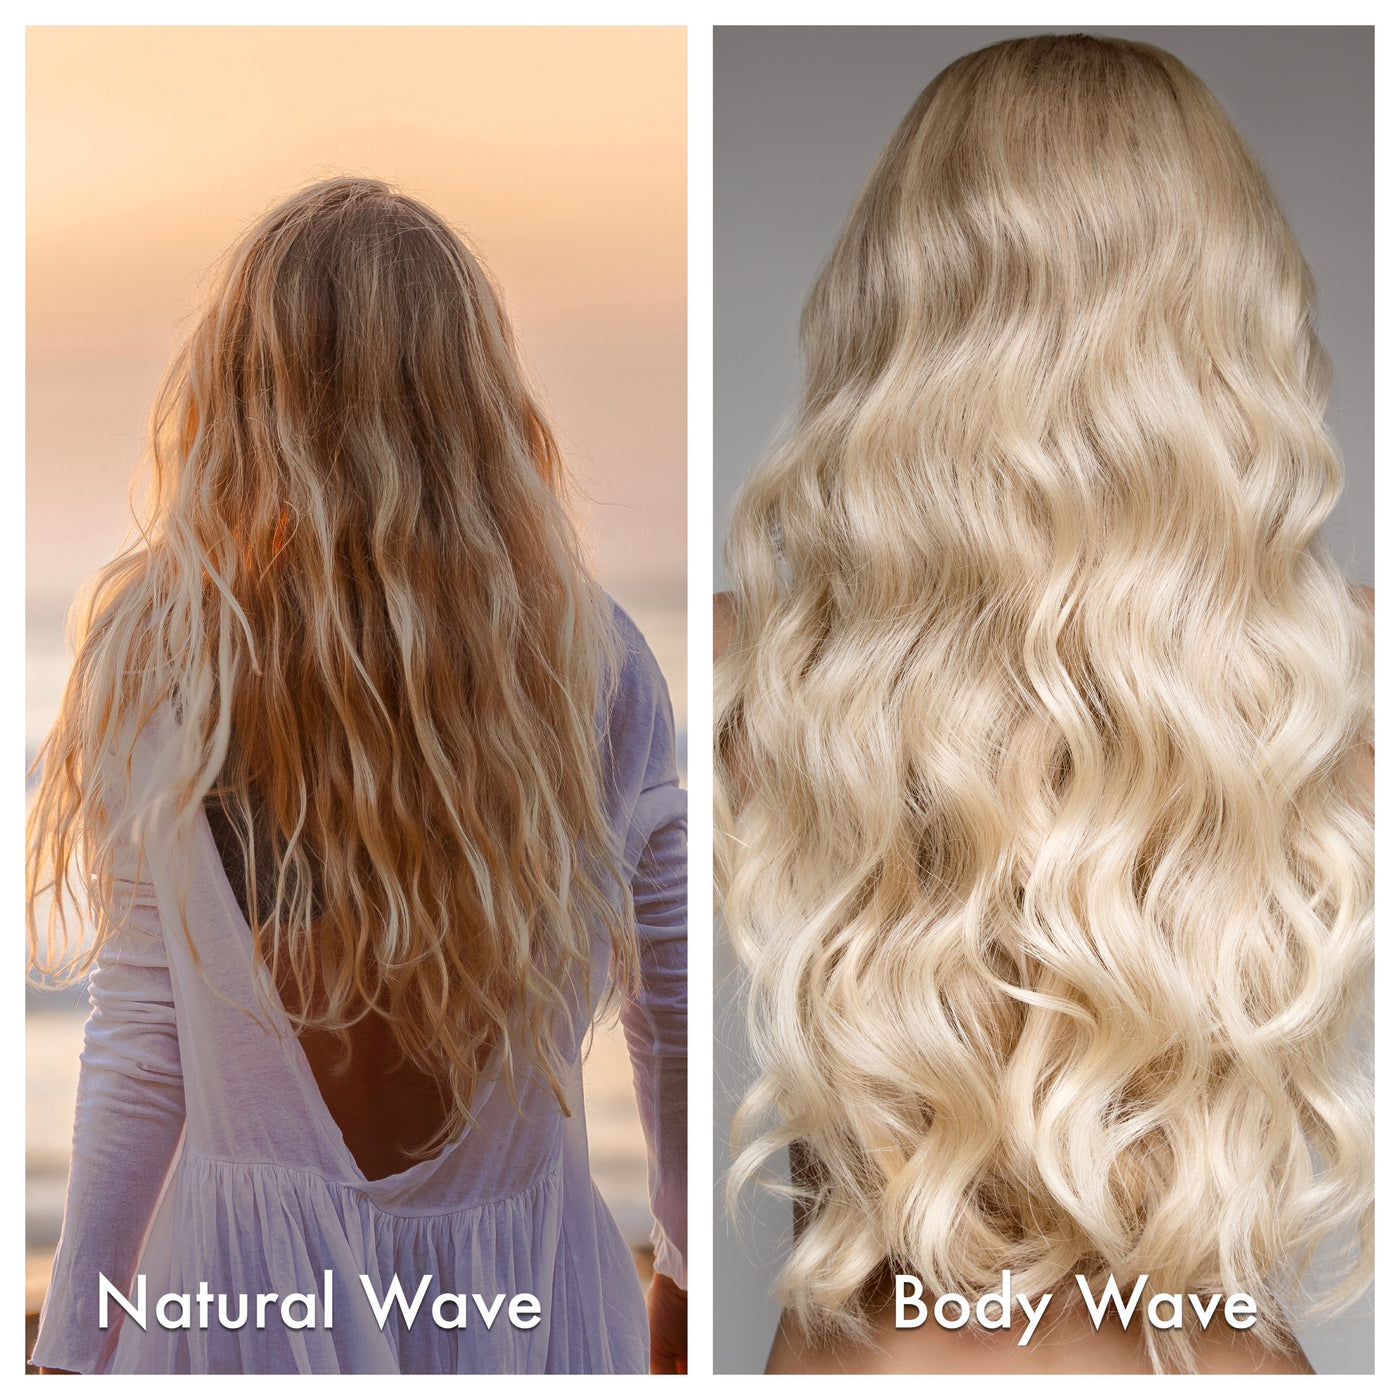 LUXE Wave Weft Hair Extensions | #4 - Sultry